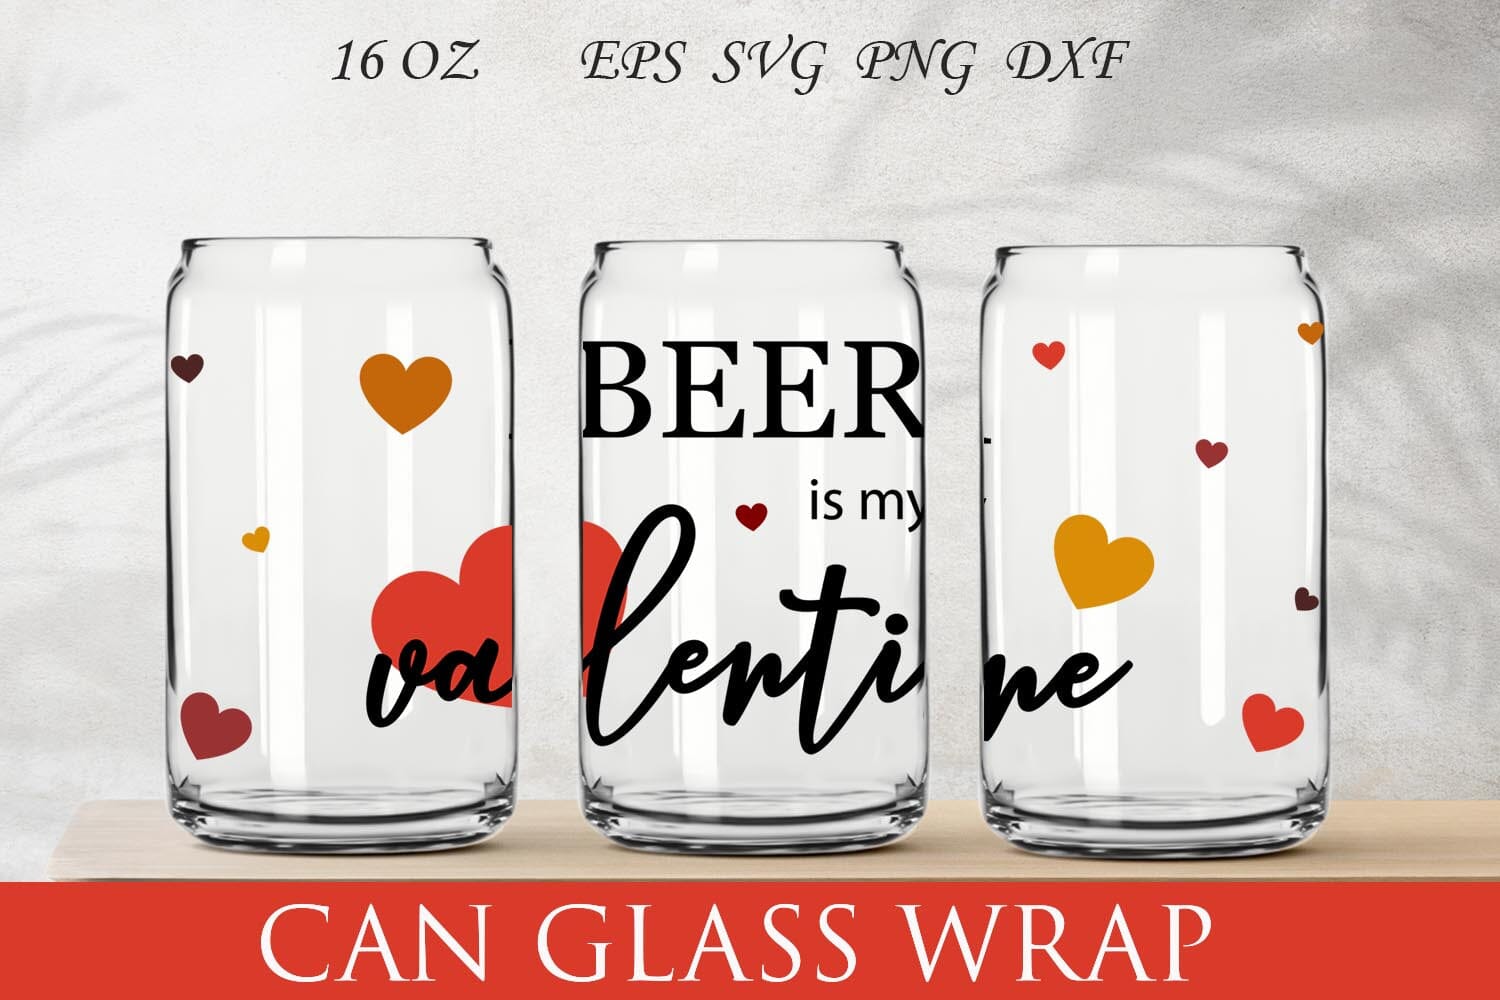 Flower 16 Oz LIBBEY GLASS SVG Bundle Beer Can Glass Svg for Cup